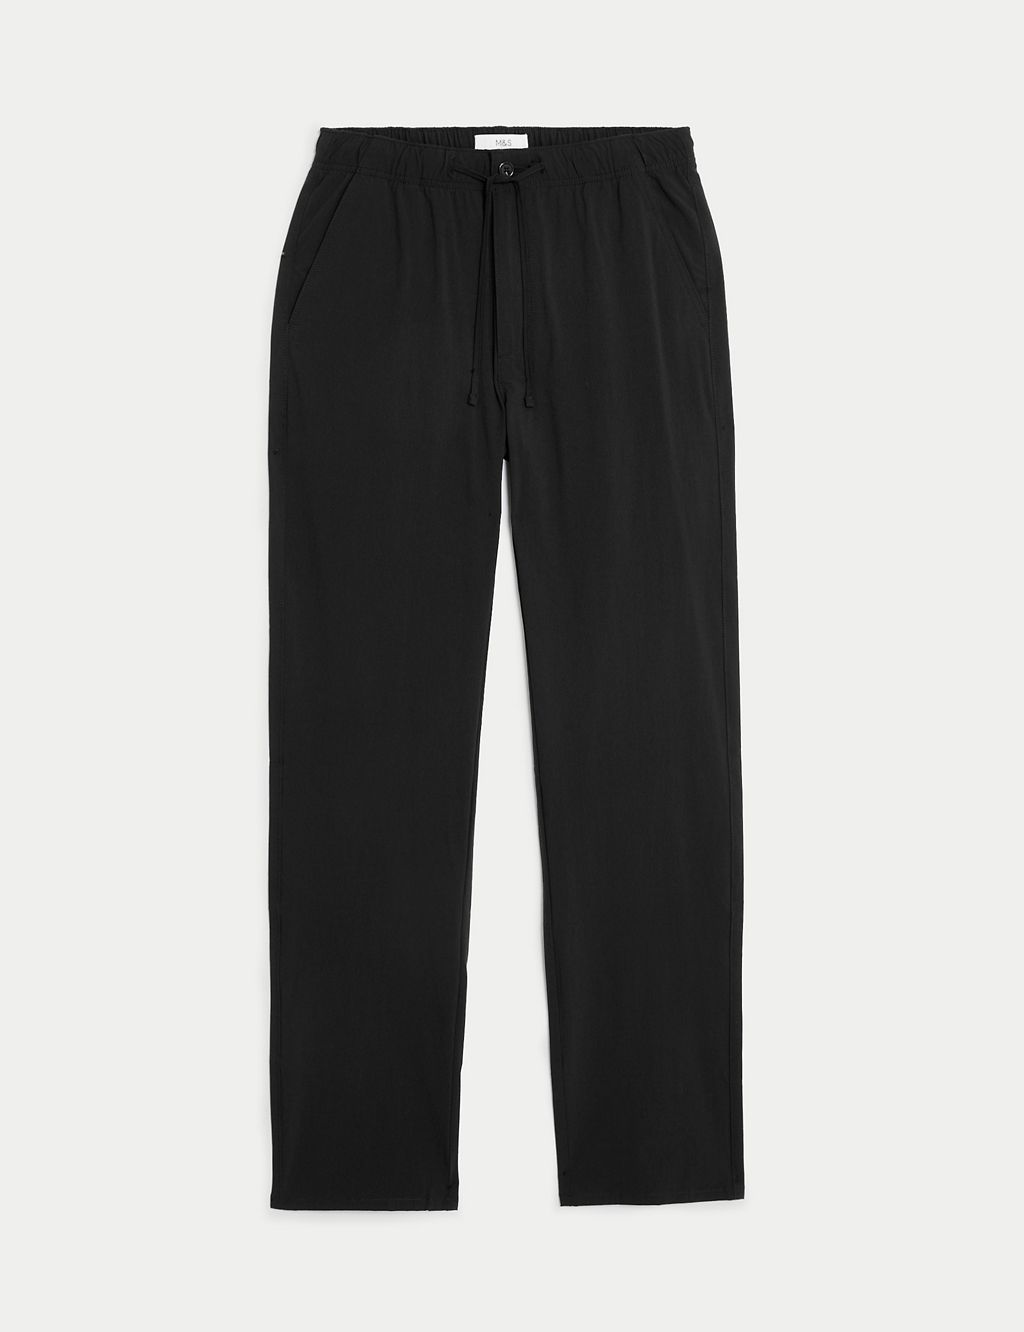 Slim Fit Elasticated Waist Trousers | M&S Collection | M&S